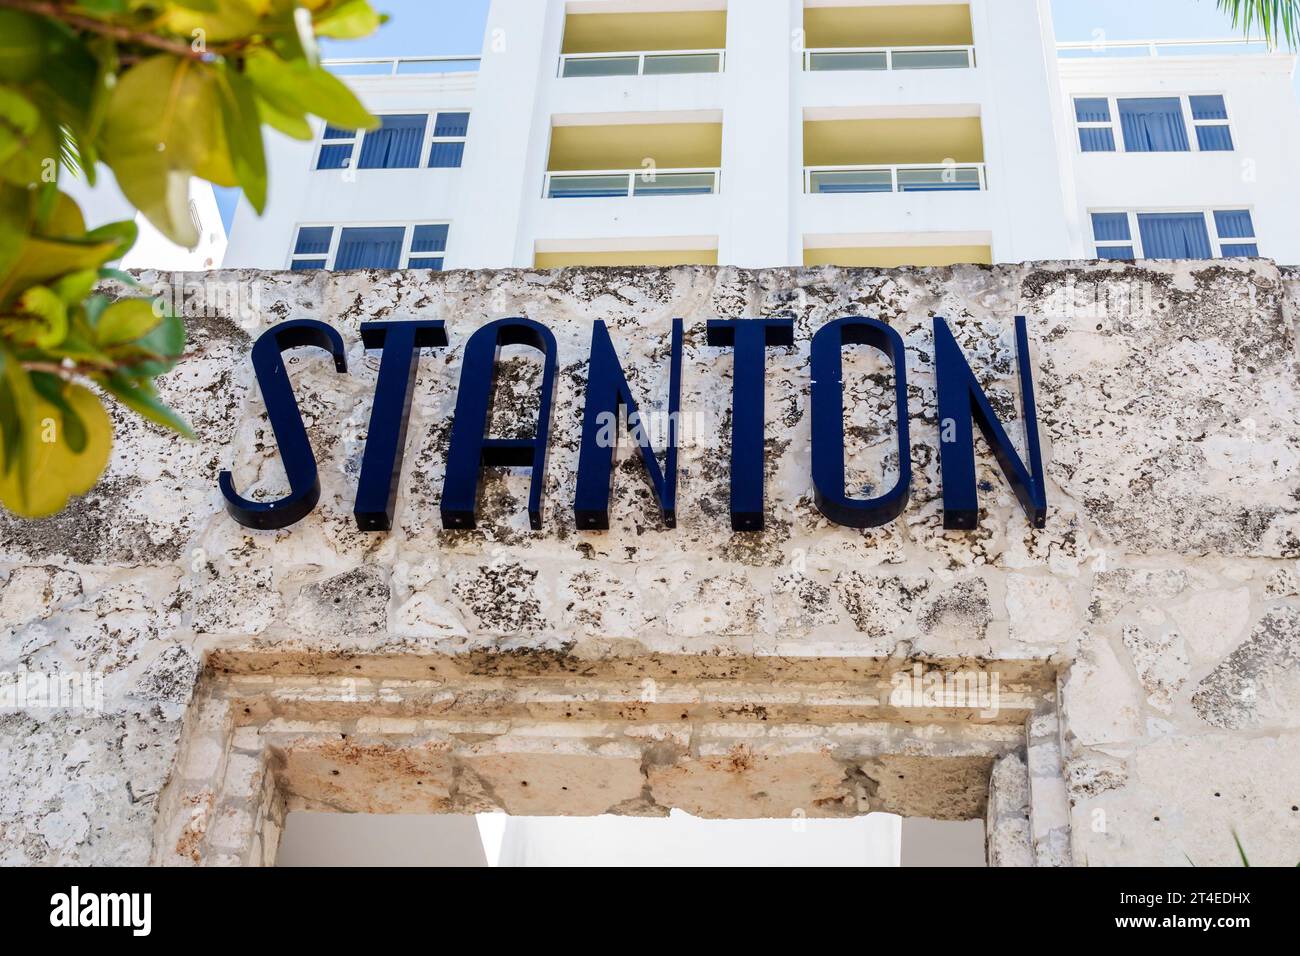 Miami Beach Florida,outside exterior,building front entrance hotel,Ocean Drive,Marriott Stanton South Beach sign,hotels motels businesses Stock Photo